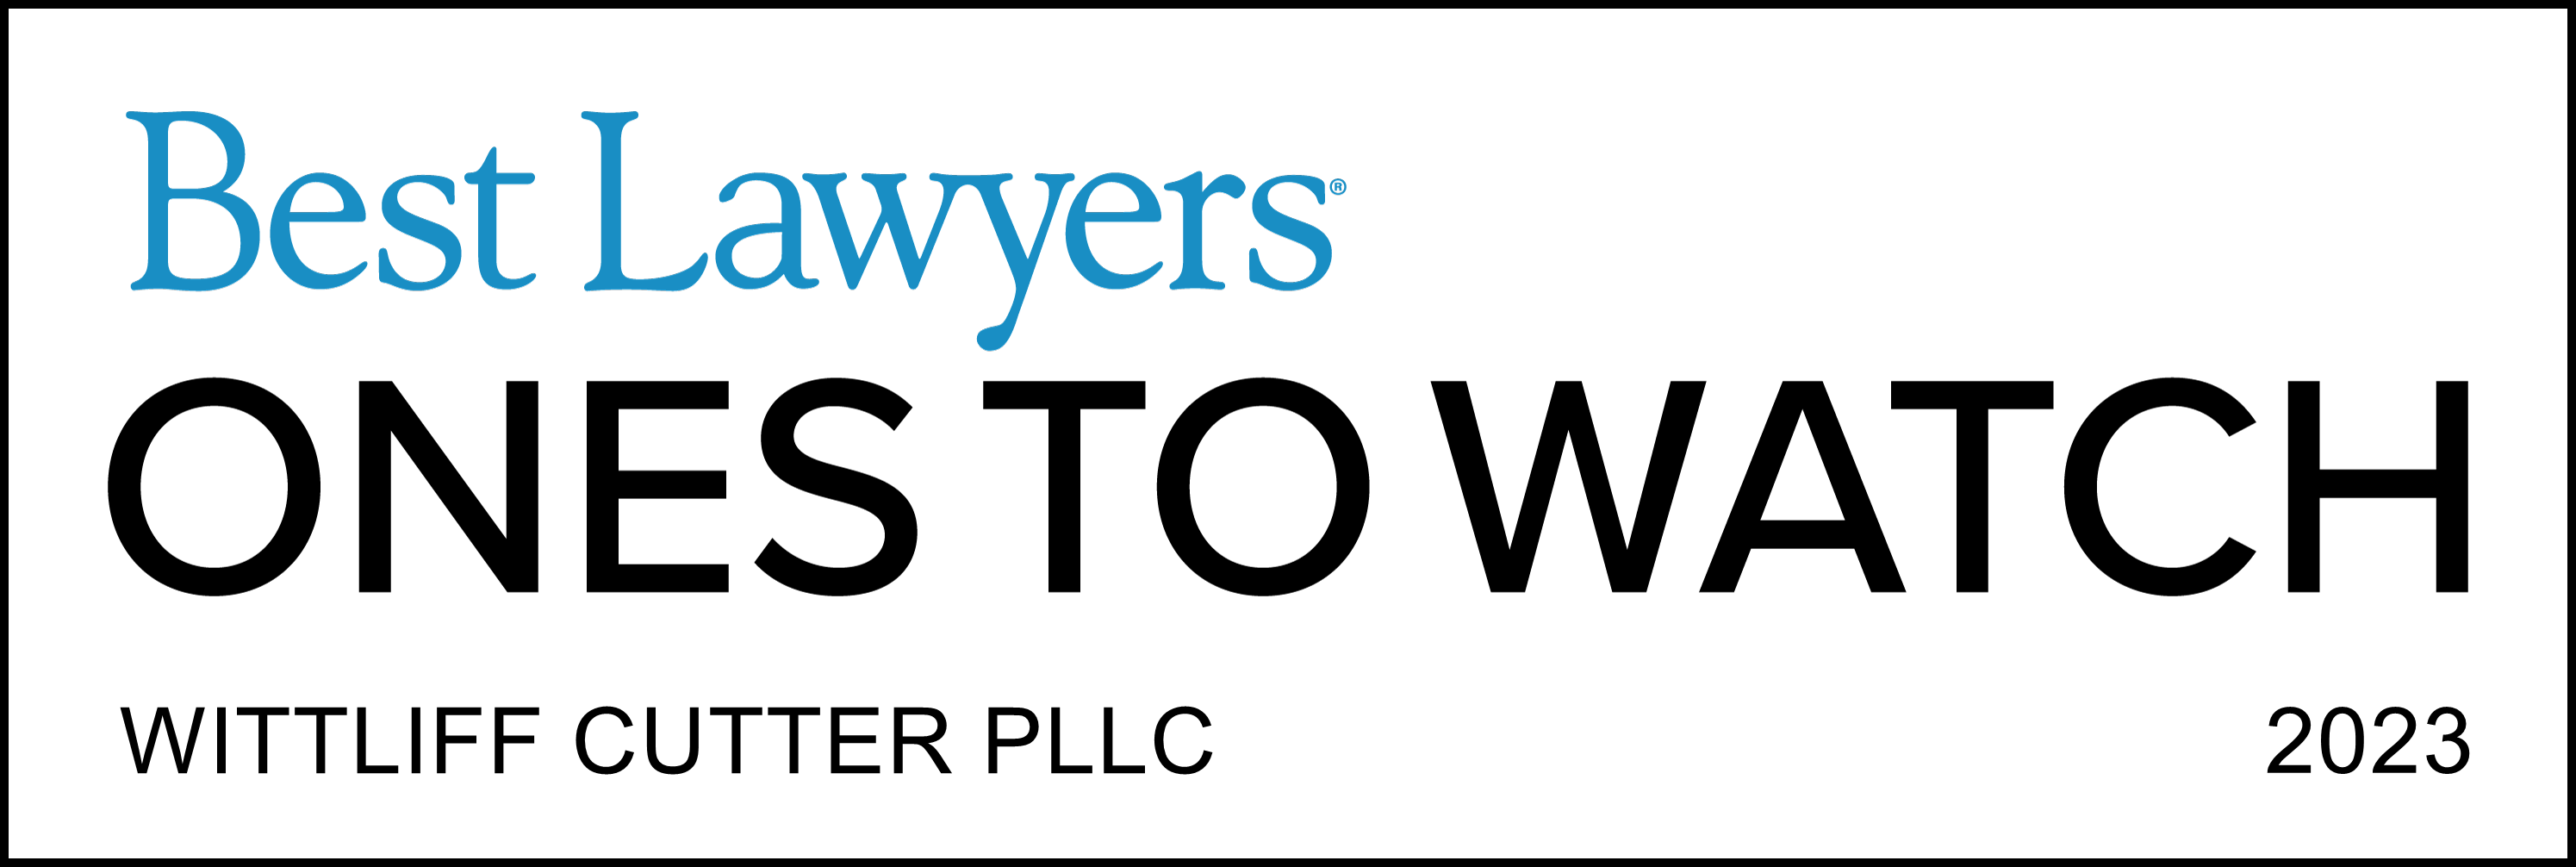 Best Lawyers Ones to Watch 2023